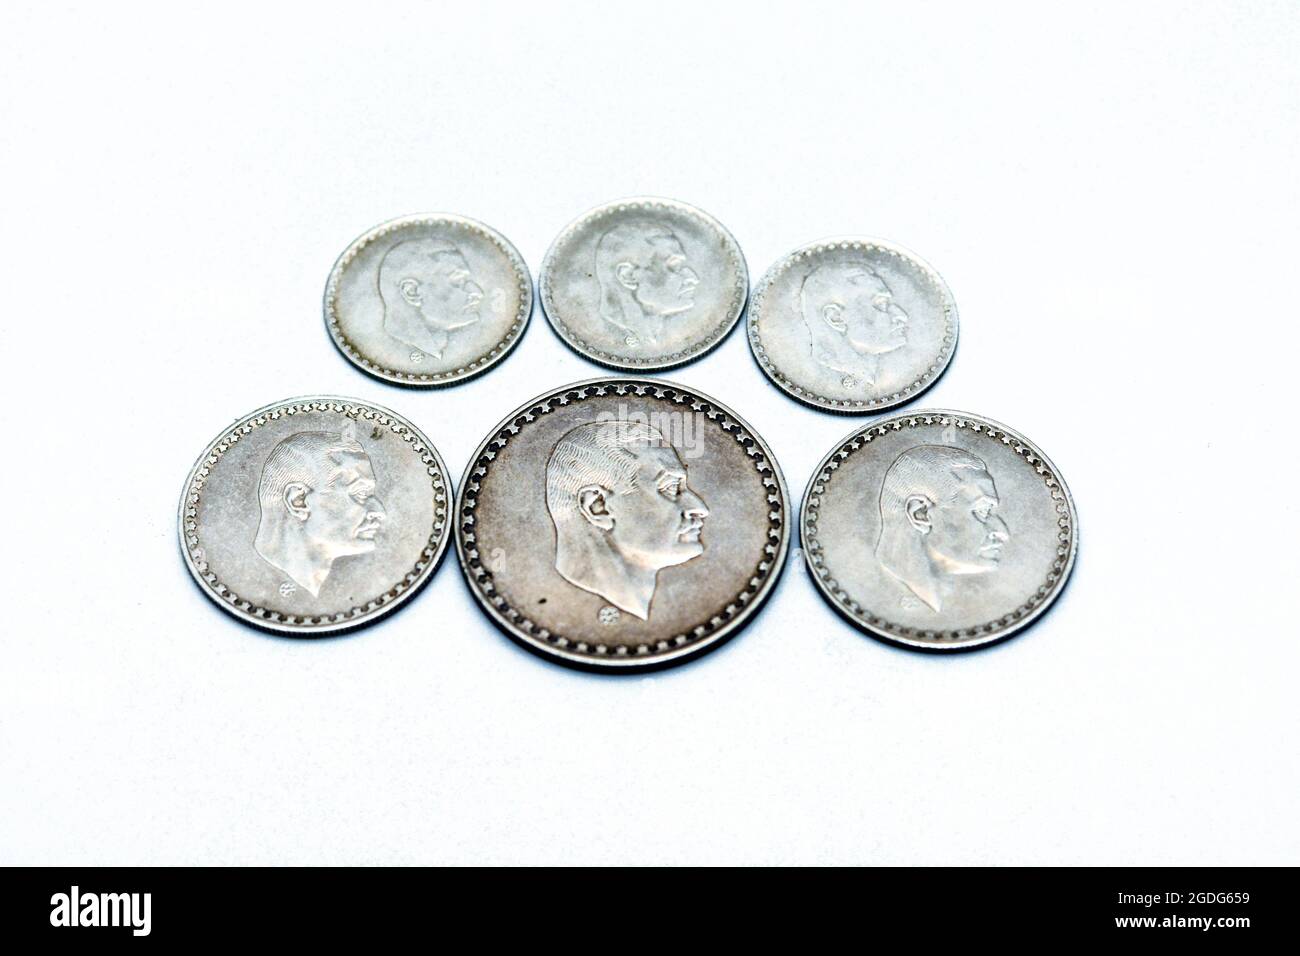 Old Egyptian silver coins of one pound, 50 piasters and 25 piasters 1970 subject President Nasser, commemorative coin of president Gamal Abdel Nasser Stock Photo